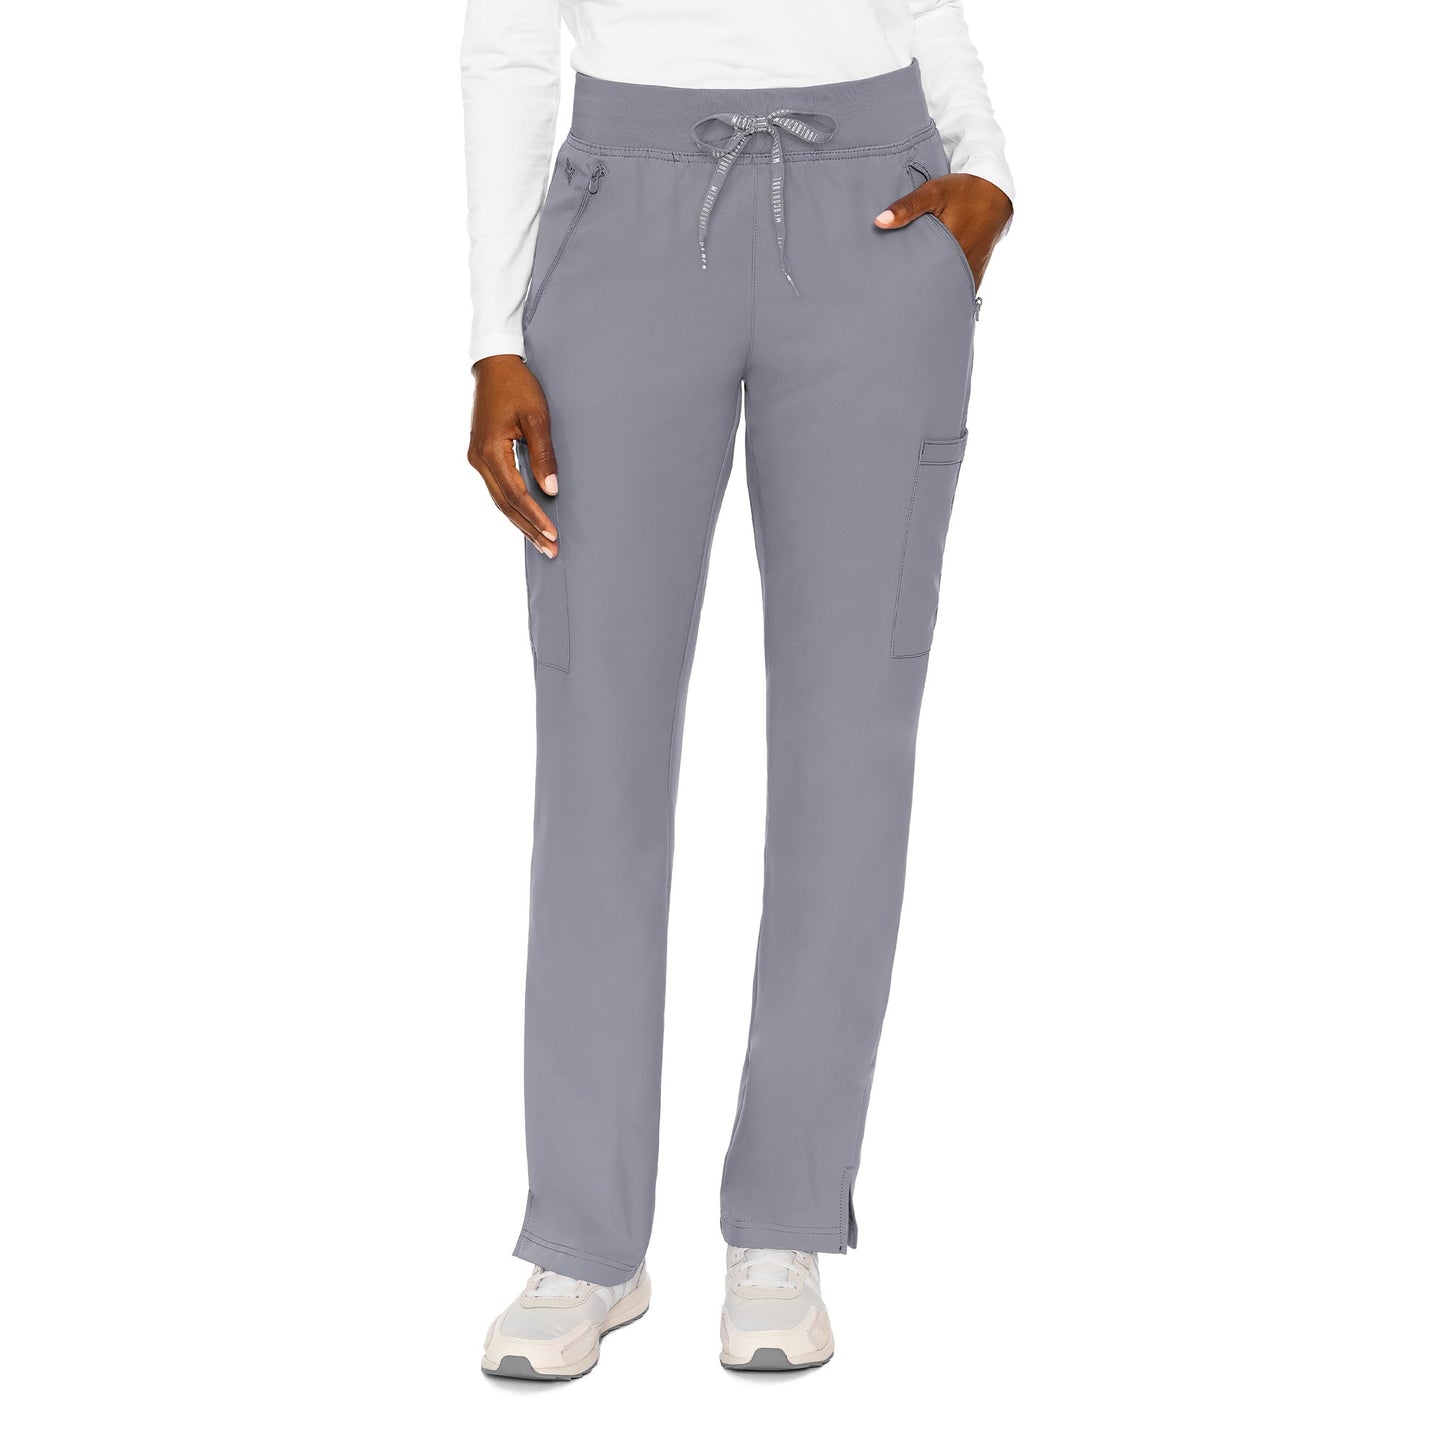 Med Couture Insight Zipper Pant Tall (XS-XL)